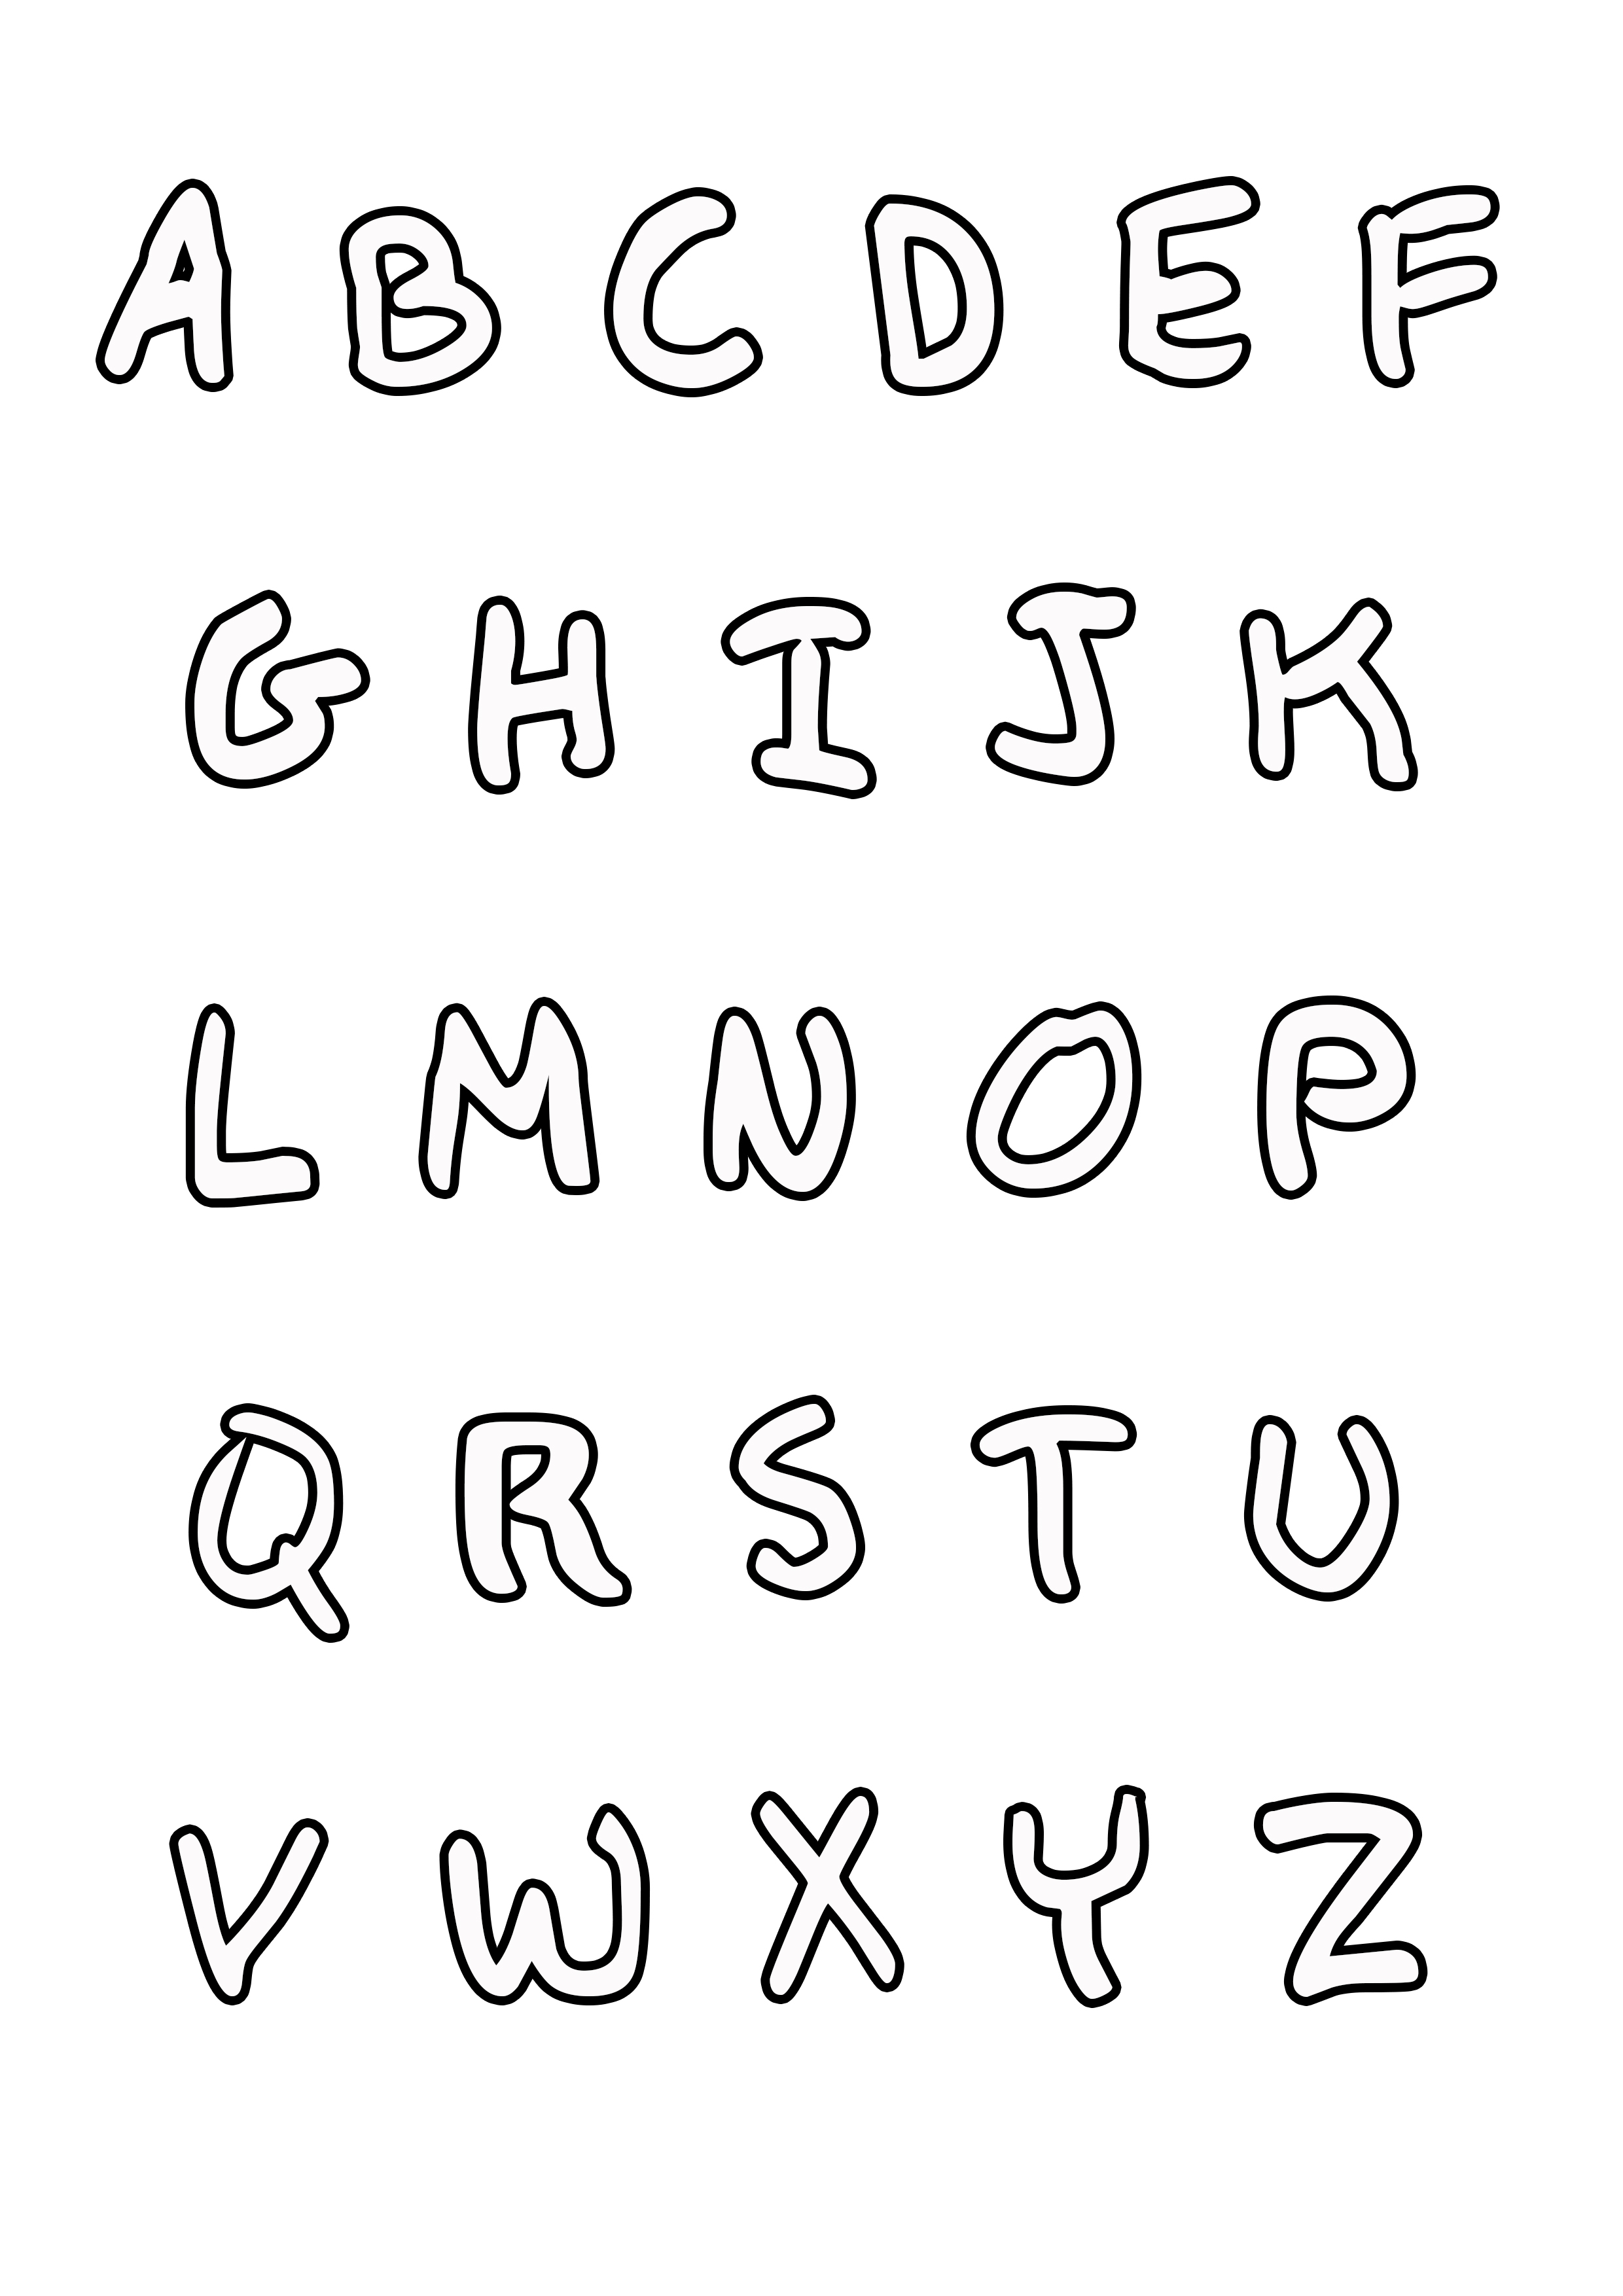 Free Alphabet coloring page to download : From A to Z (Hand drawn simple style)